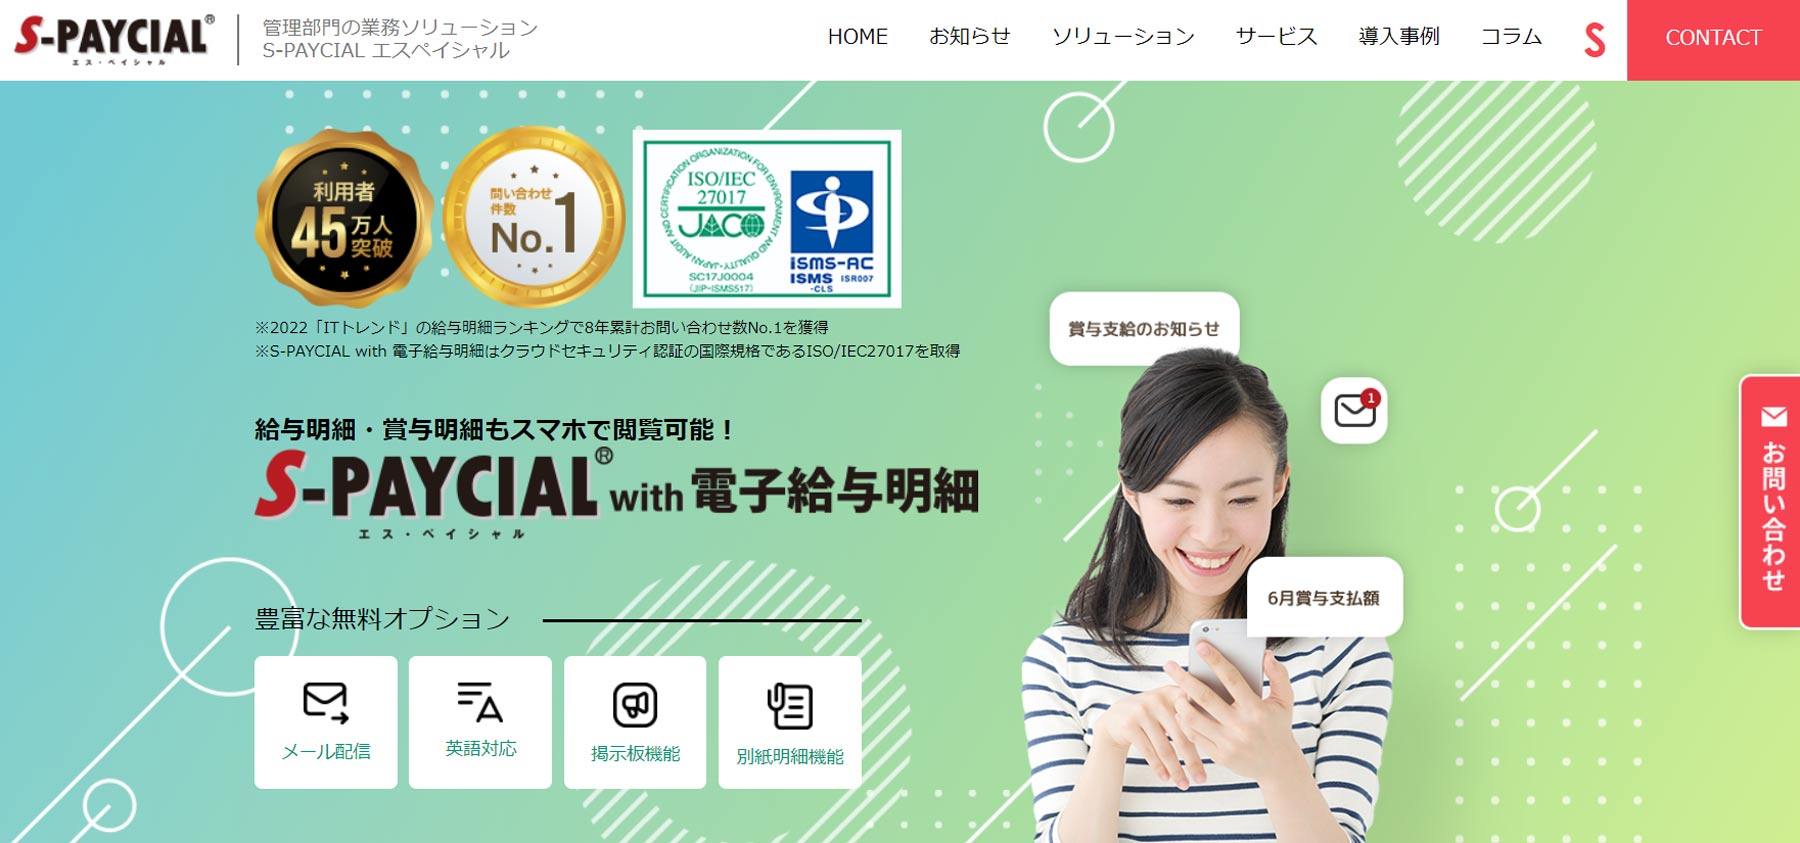 S-PAYCIAL with 電子給与明細公式Webサイト